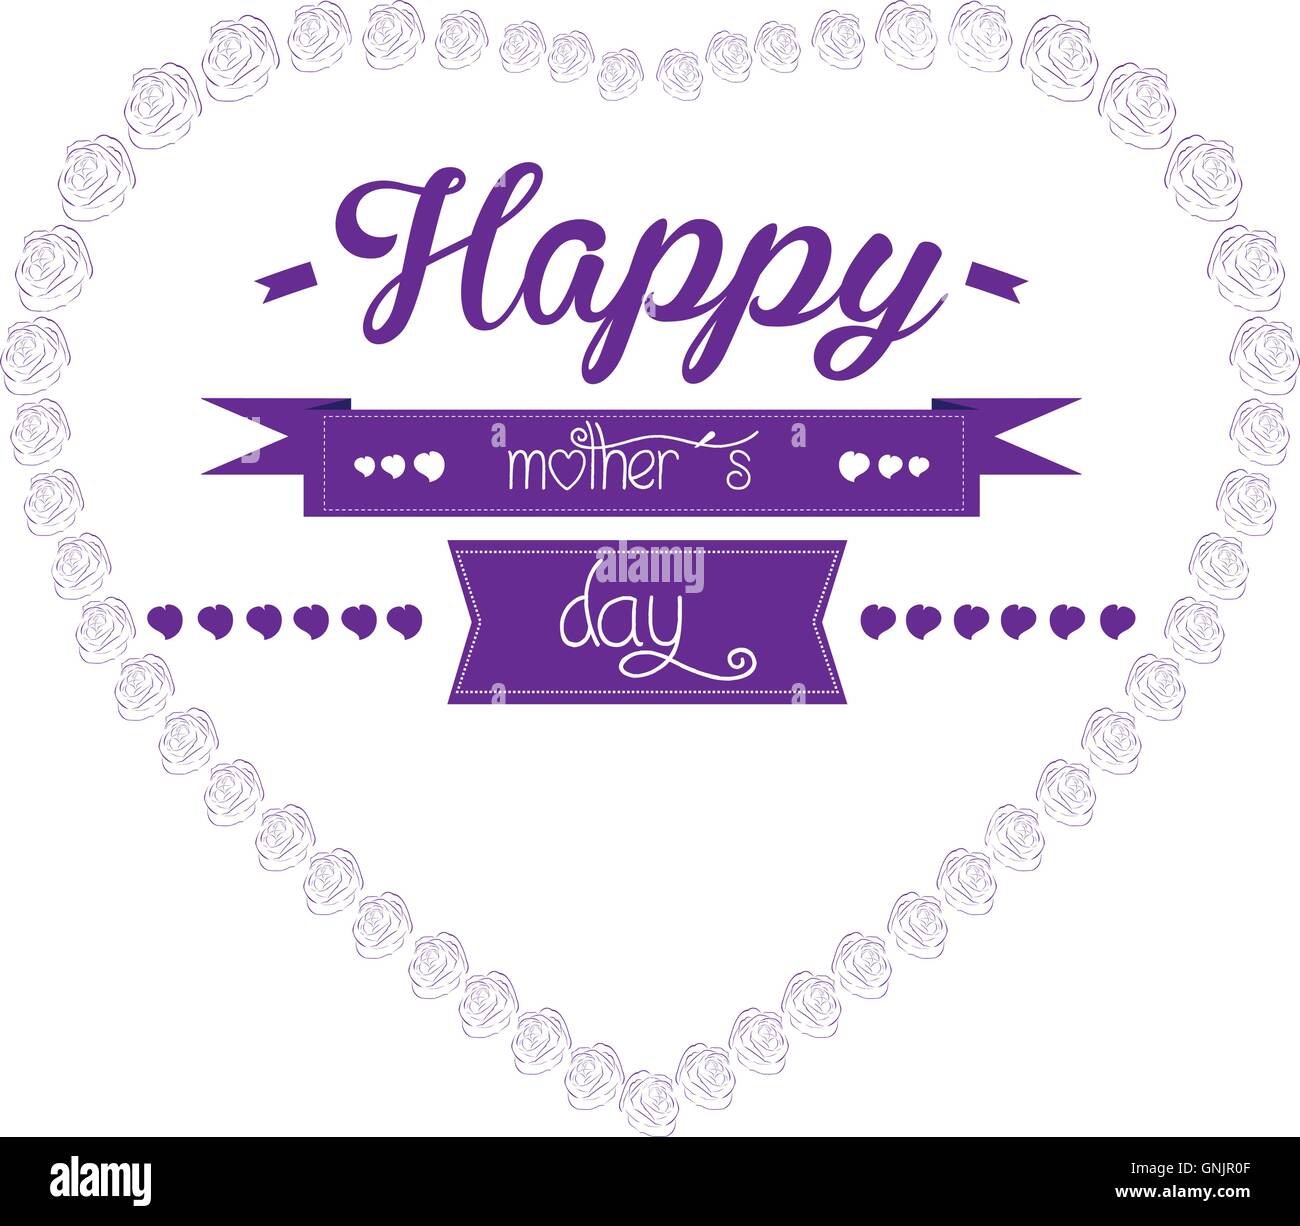 Isolated heart shape composed by roses and a ribbon with text on a white background Stock Vector